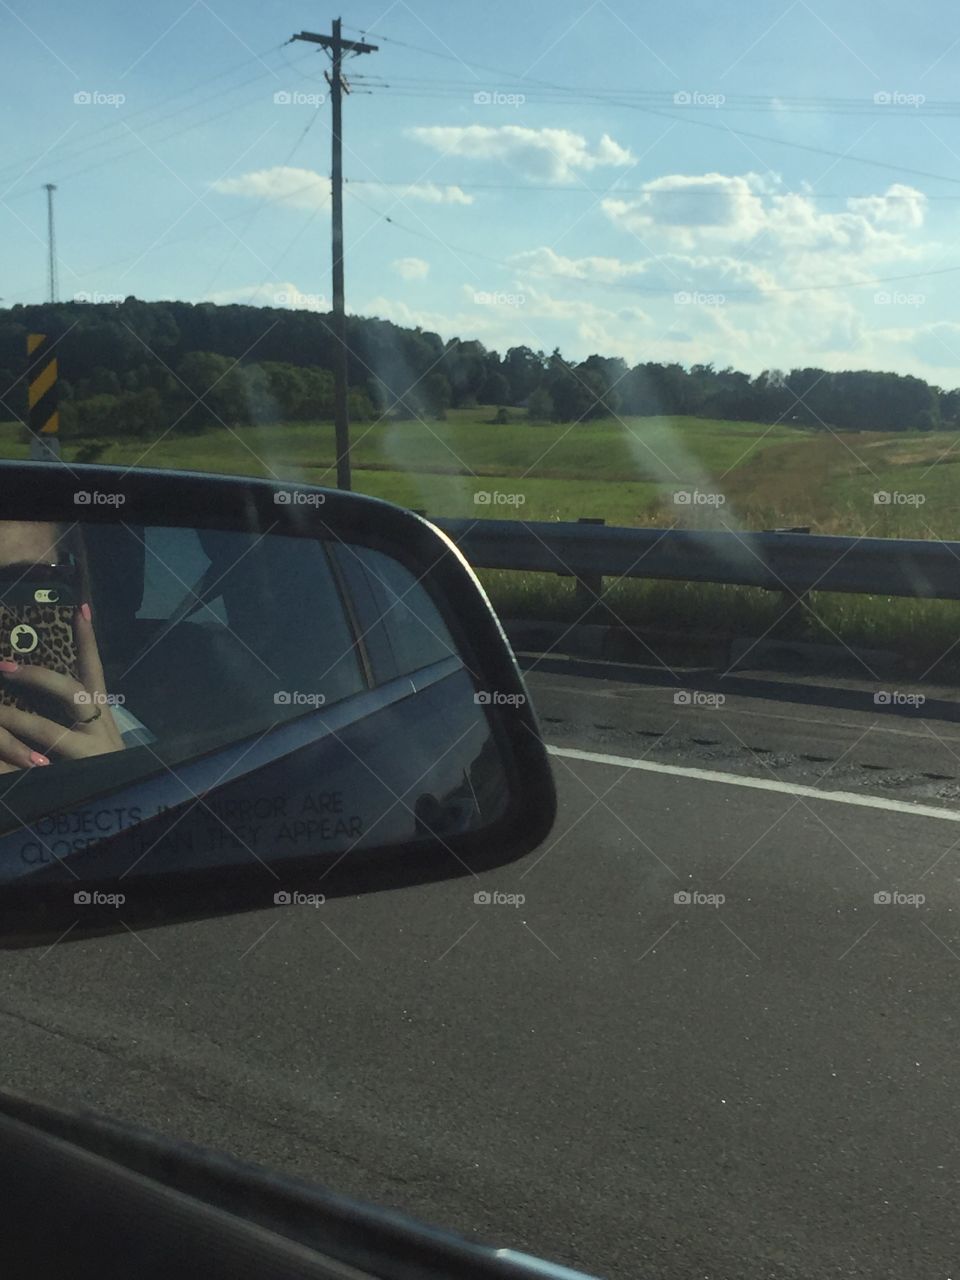 Woman taking photograph with mobile phone in a car side mirror